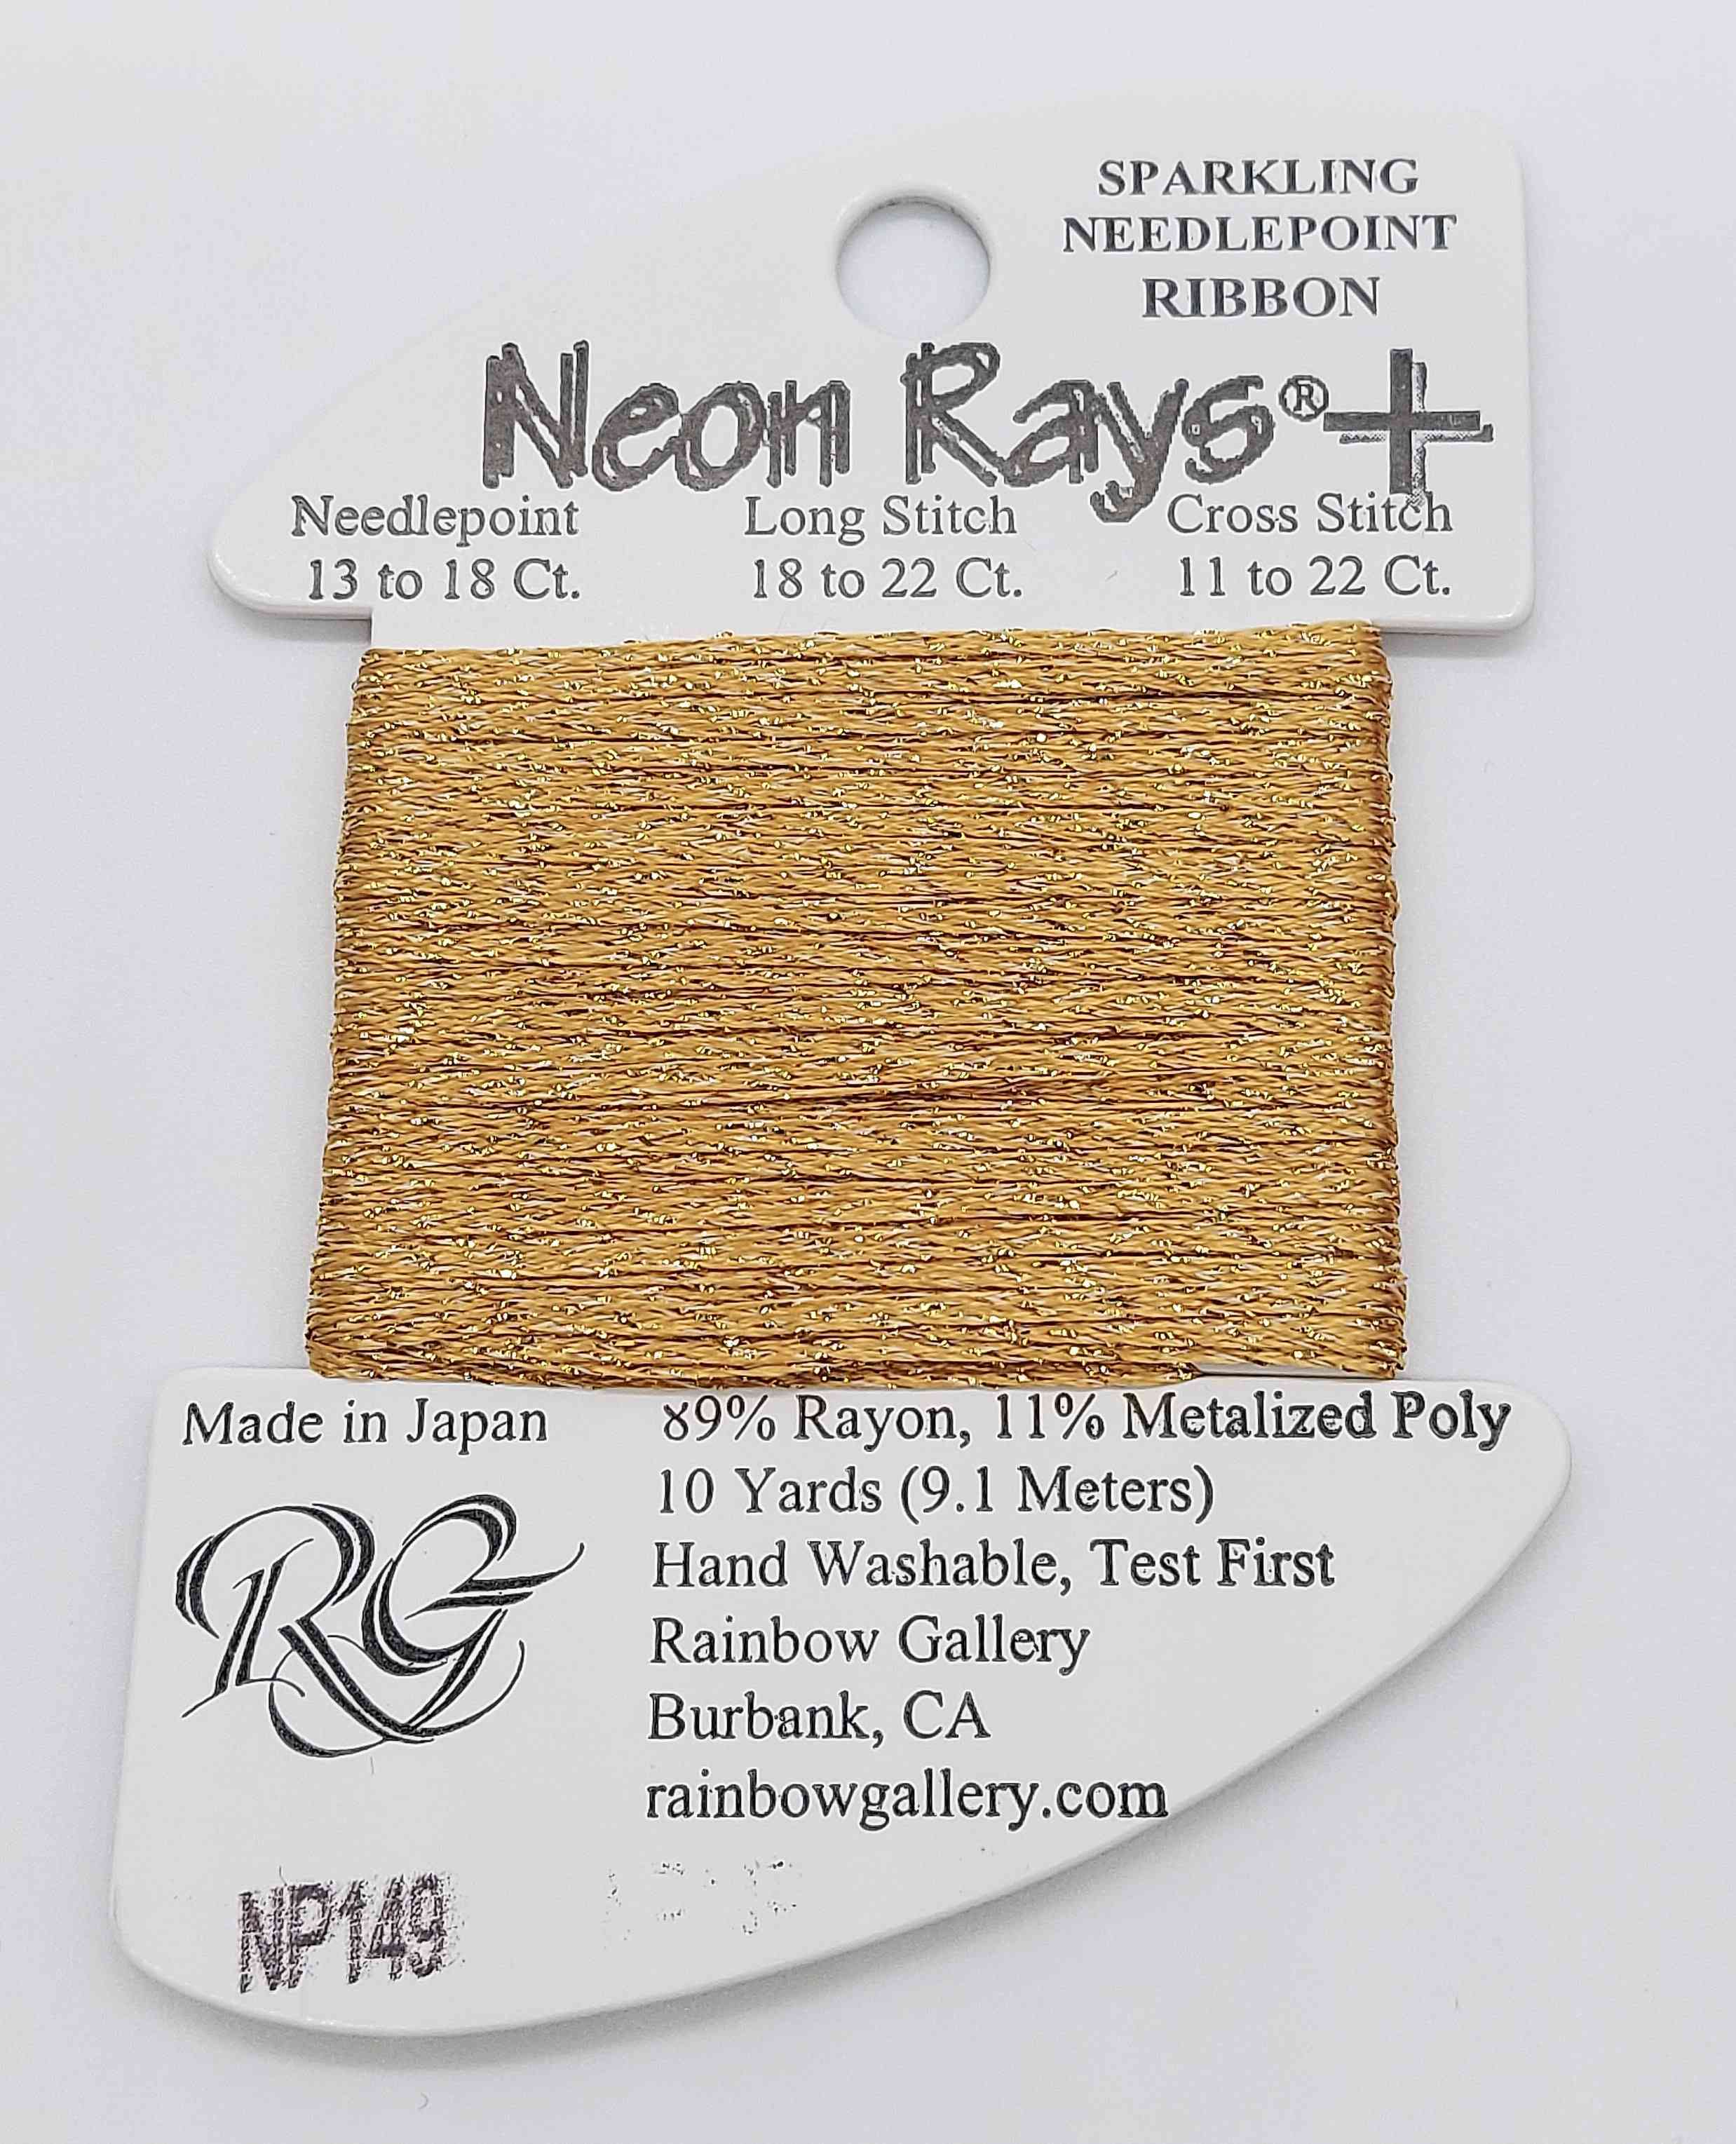 Neon Rays + (NP125 and Up)